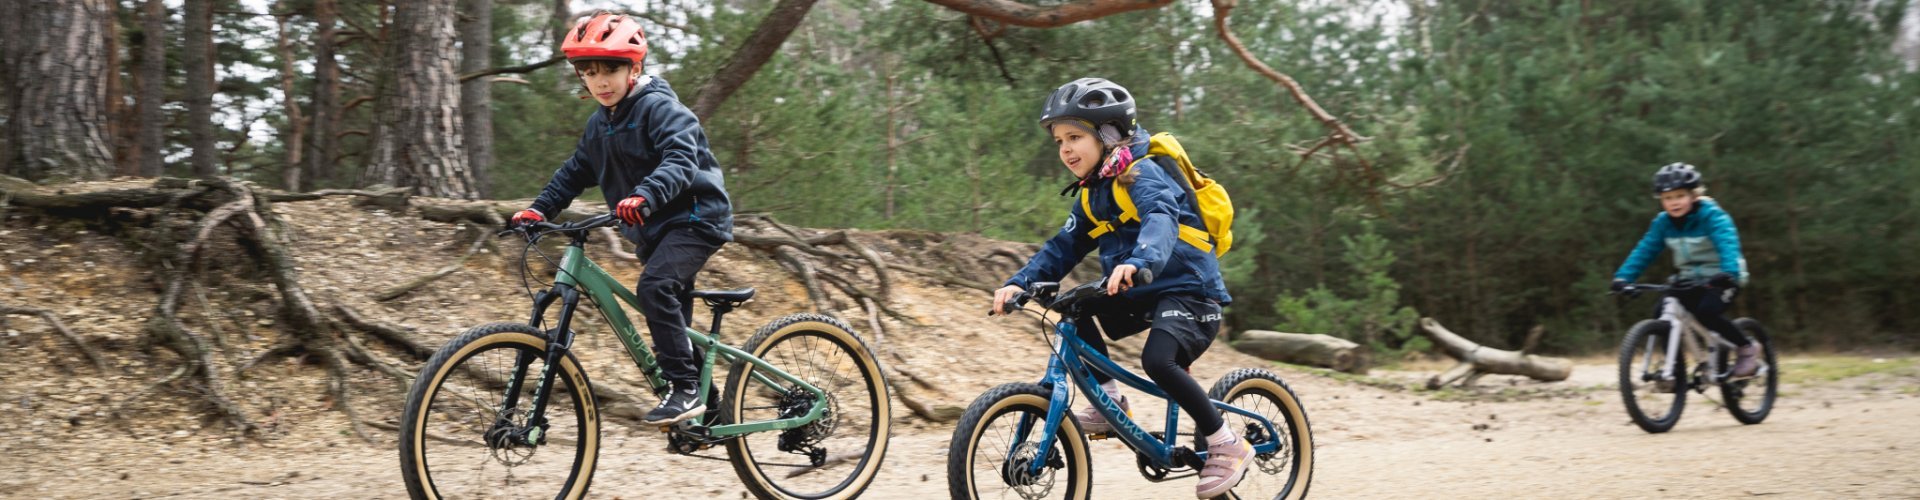 Three children ride on SUPURB and Specialized kids mountain bikes along a forest path.